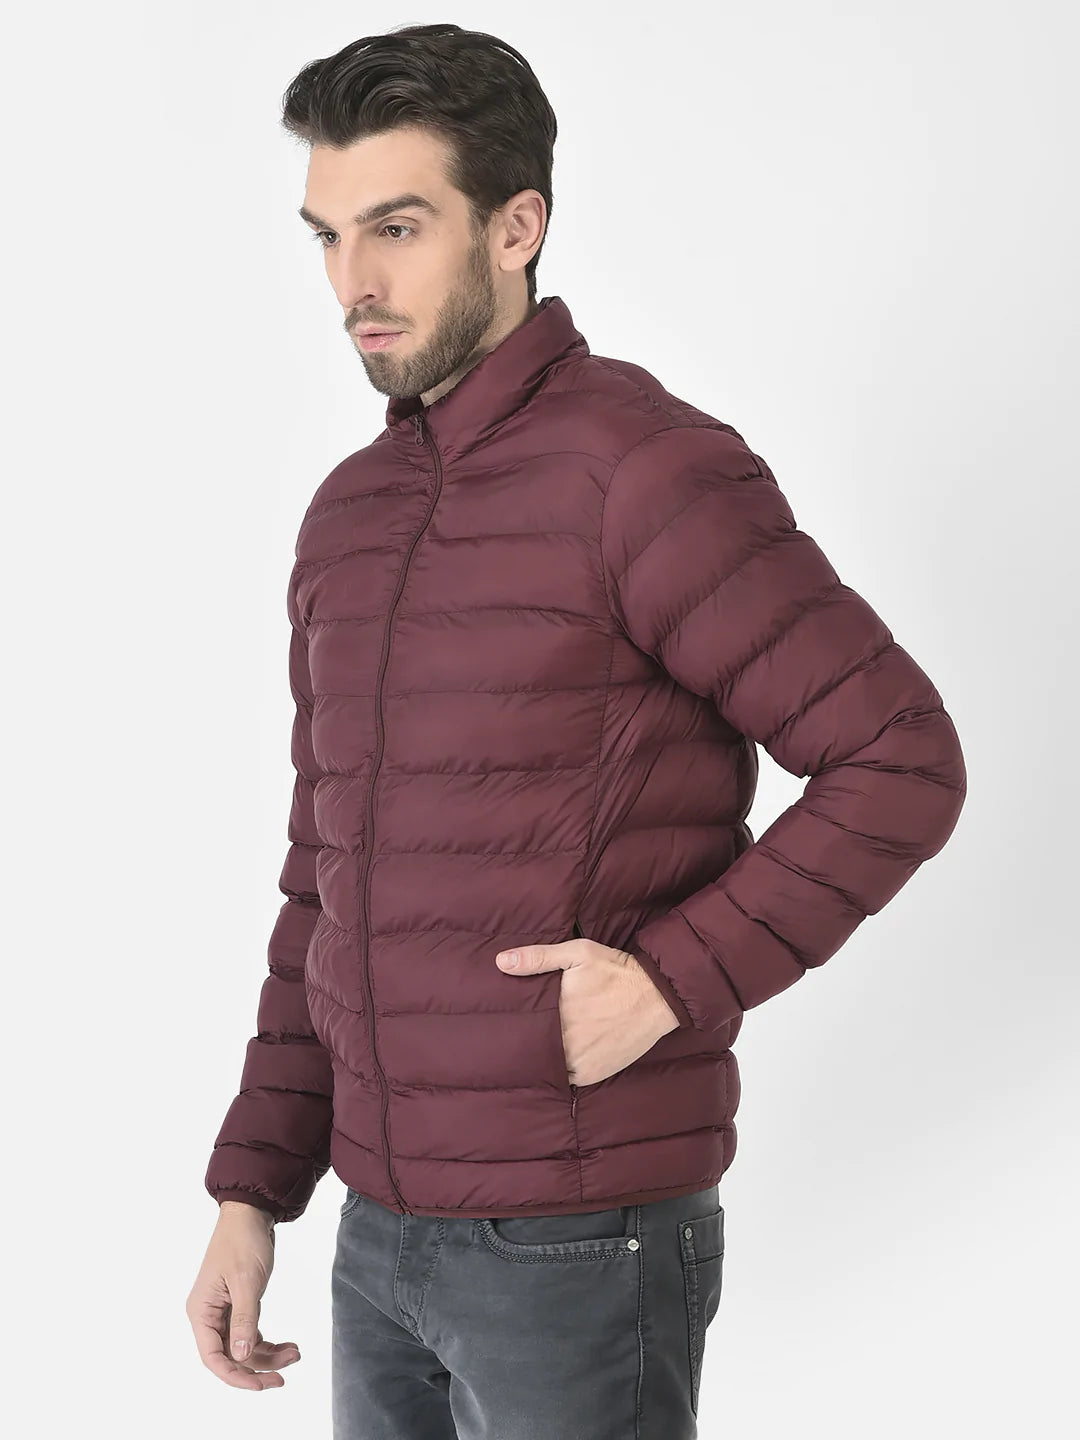  Puffer Jacket in Wine Color